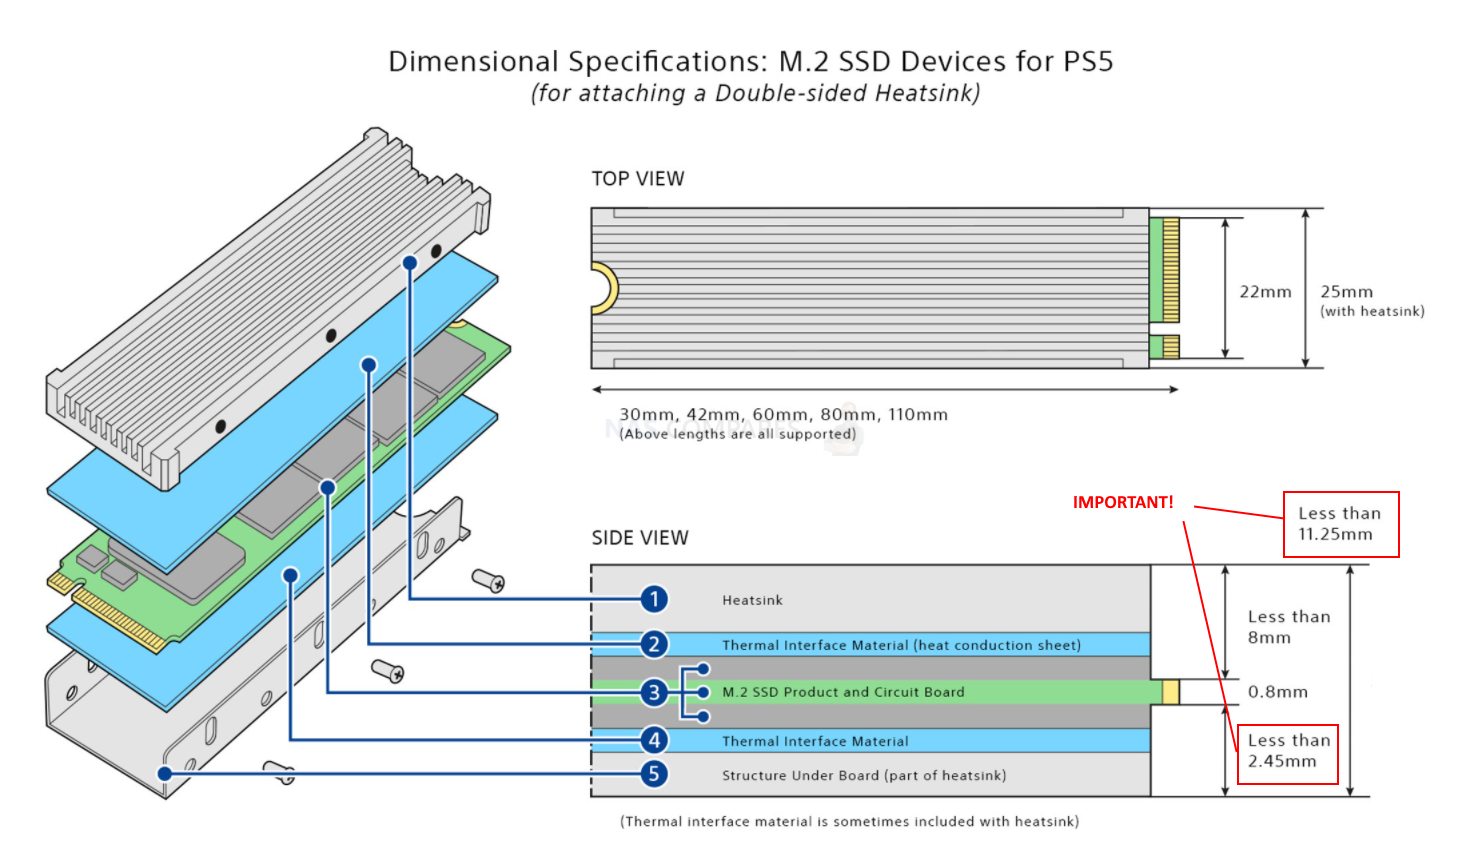 A Guide to Compatible M.2 Heatsinks for PS5 Internal Storage